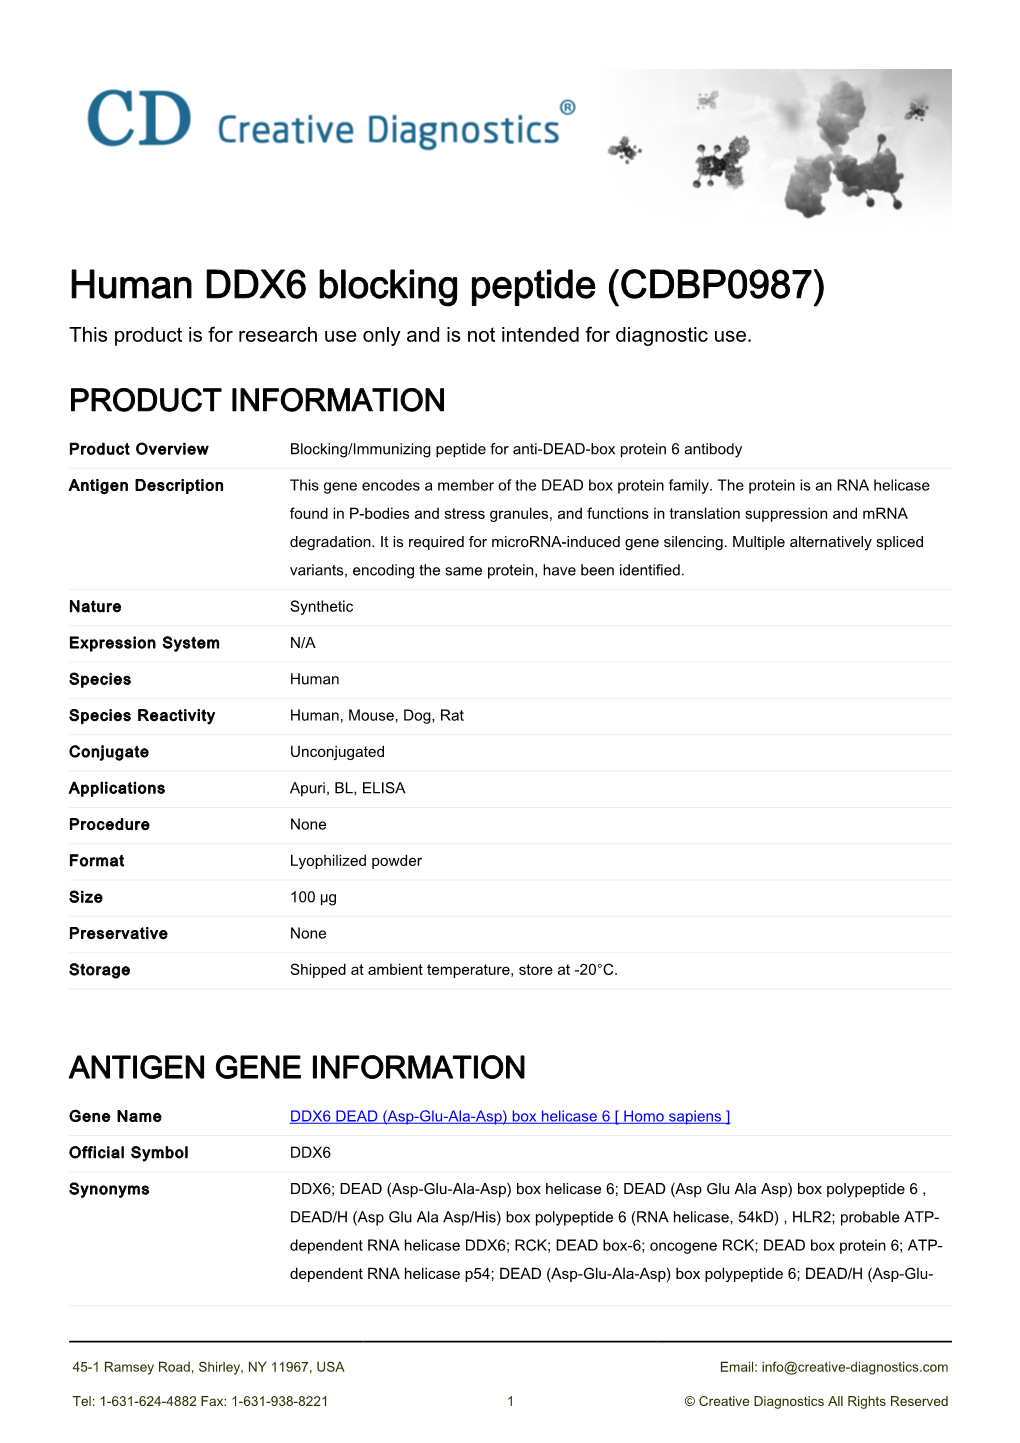 Human DDX6 Blocking Peptide (CDBP0987) This Product Is for Research Use Only and Is Not Intended for Diagnostic Use